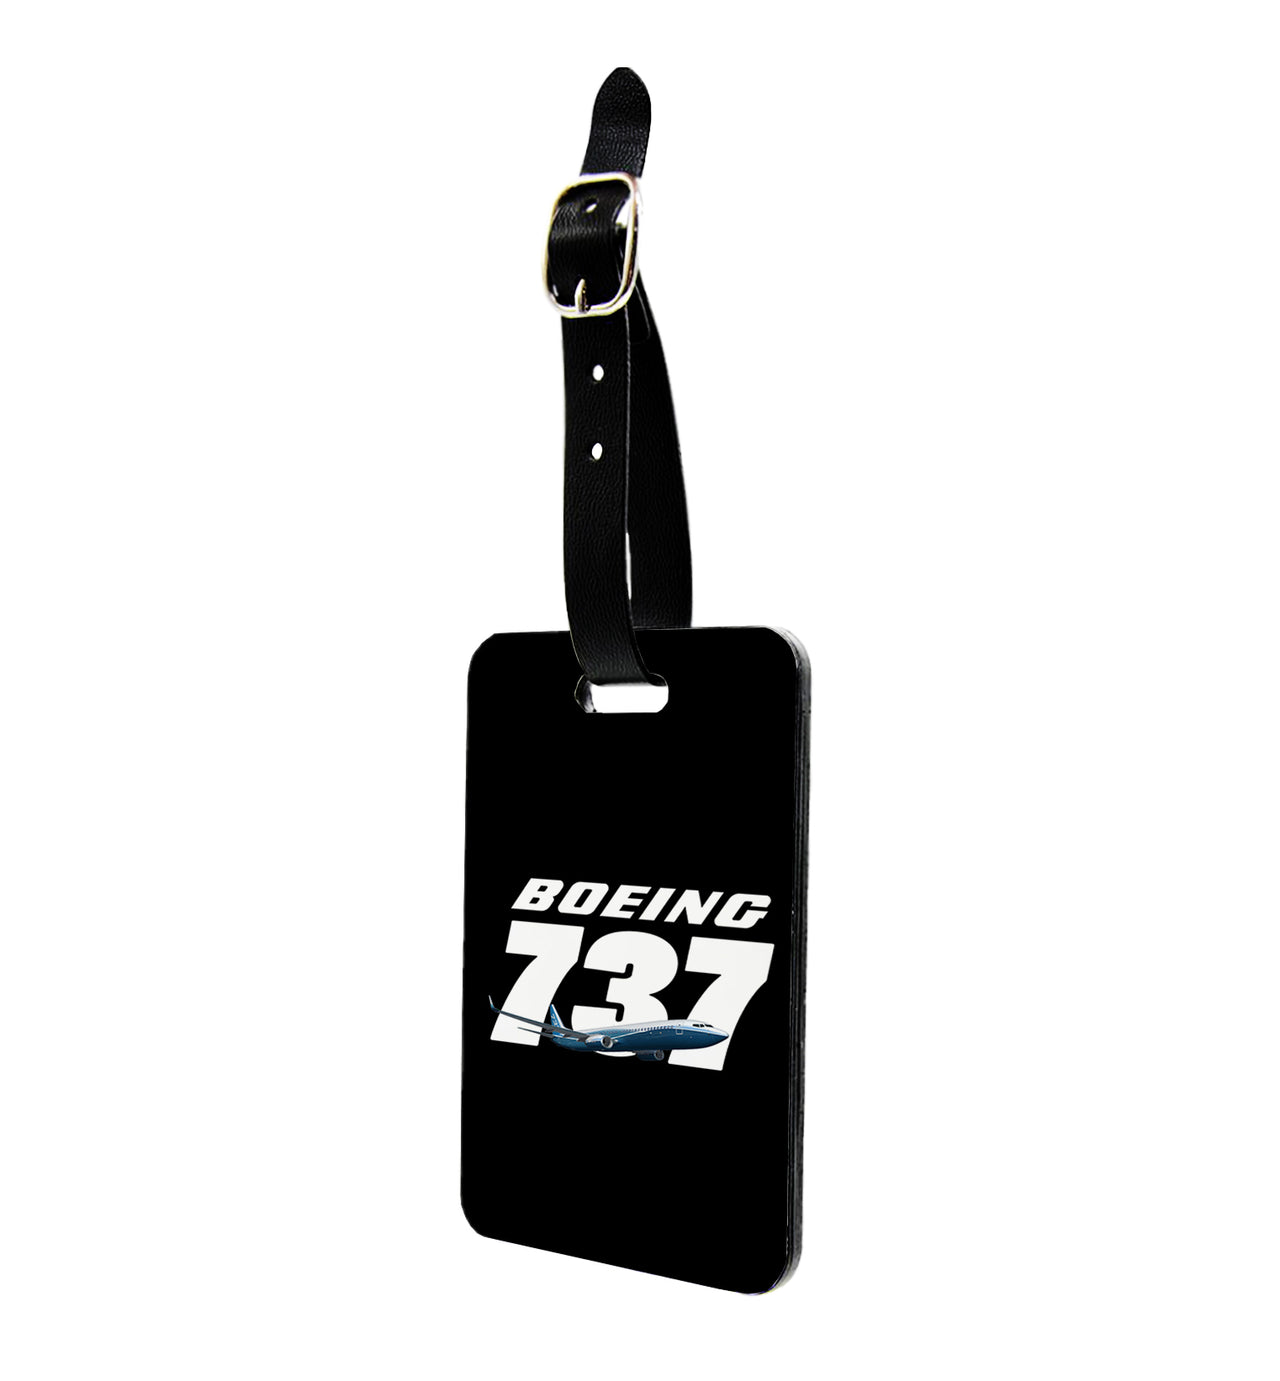 Super Boeing 737+Text Designed Luggage Tag